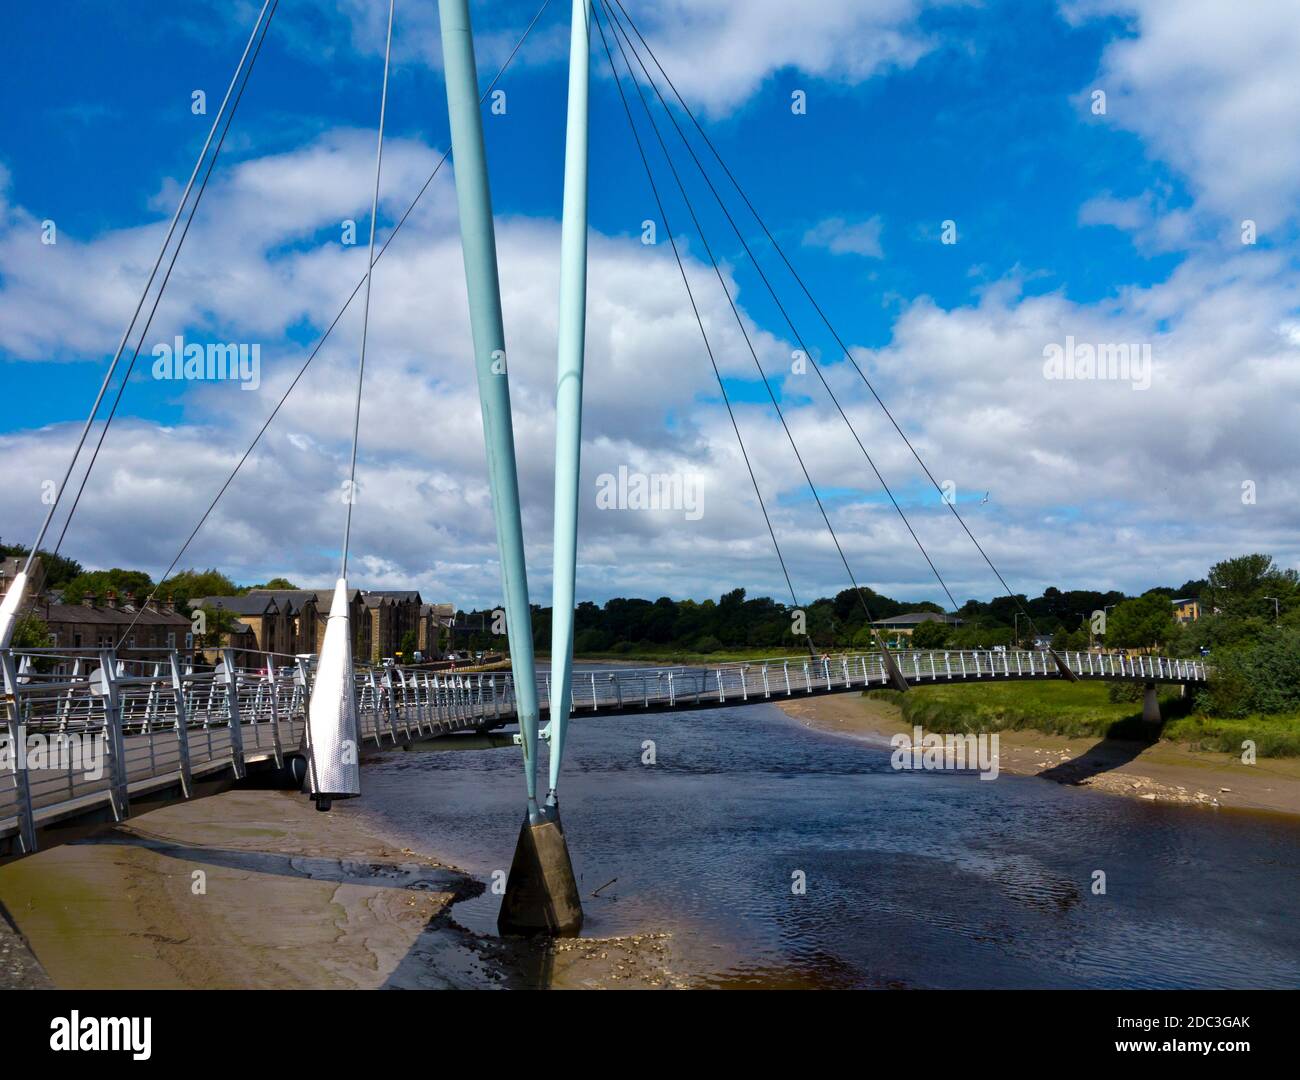 The Lune Millennium Bridge a cable-stayed footbridge which spans the River Lune in Lancaster England designed by Whitby Bird and Partners in 2000. Stock Photo